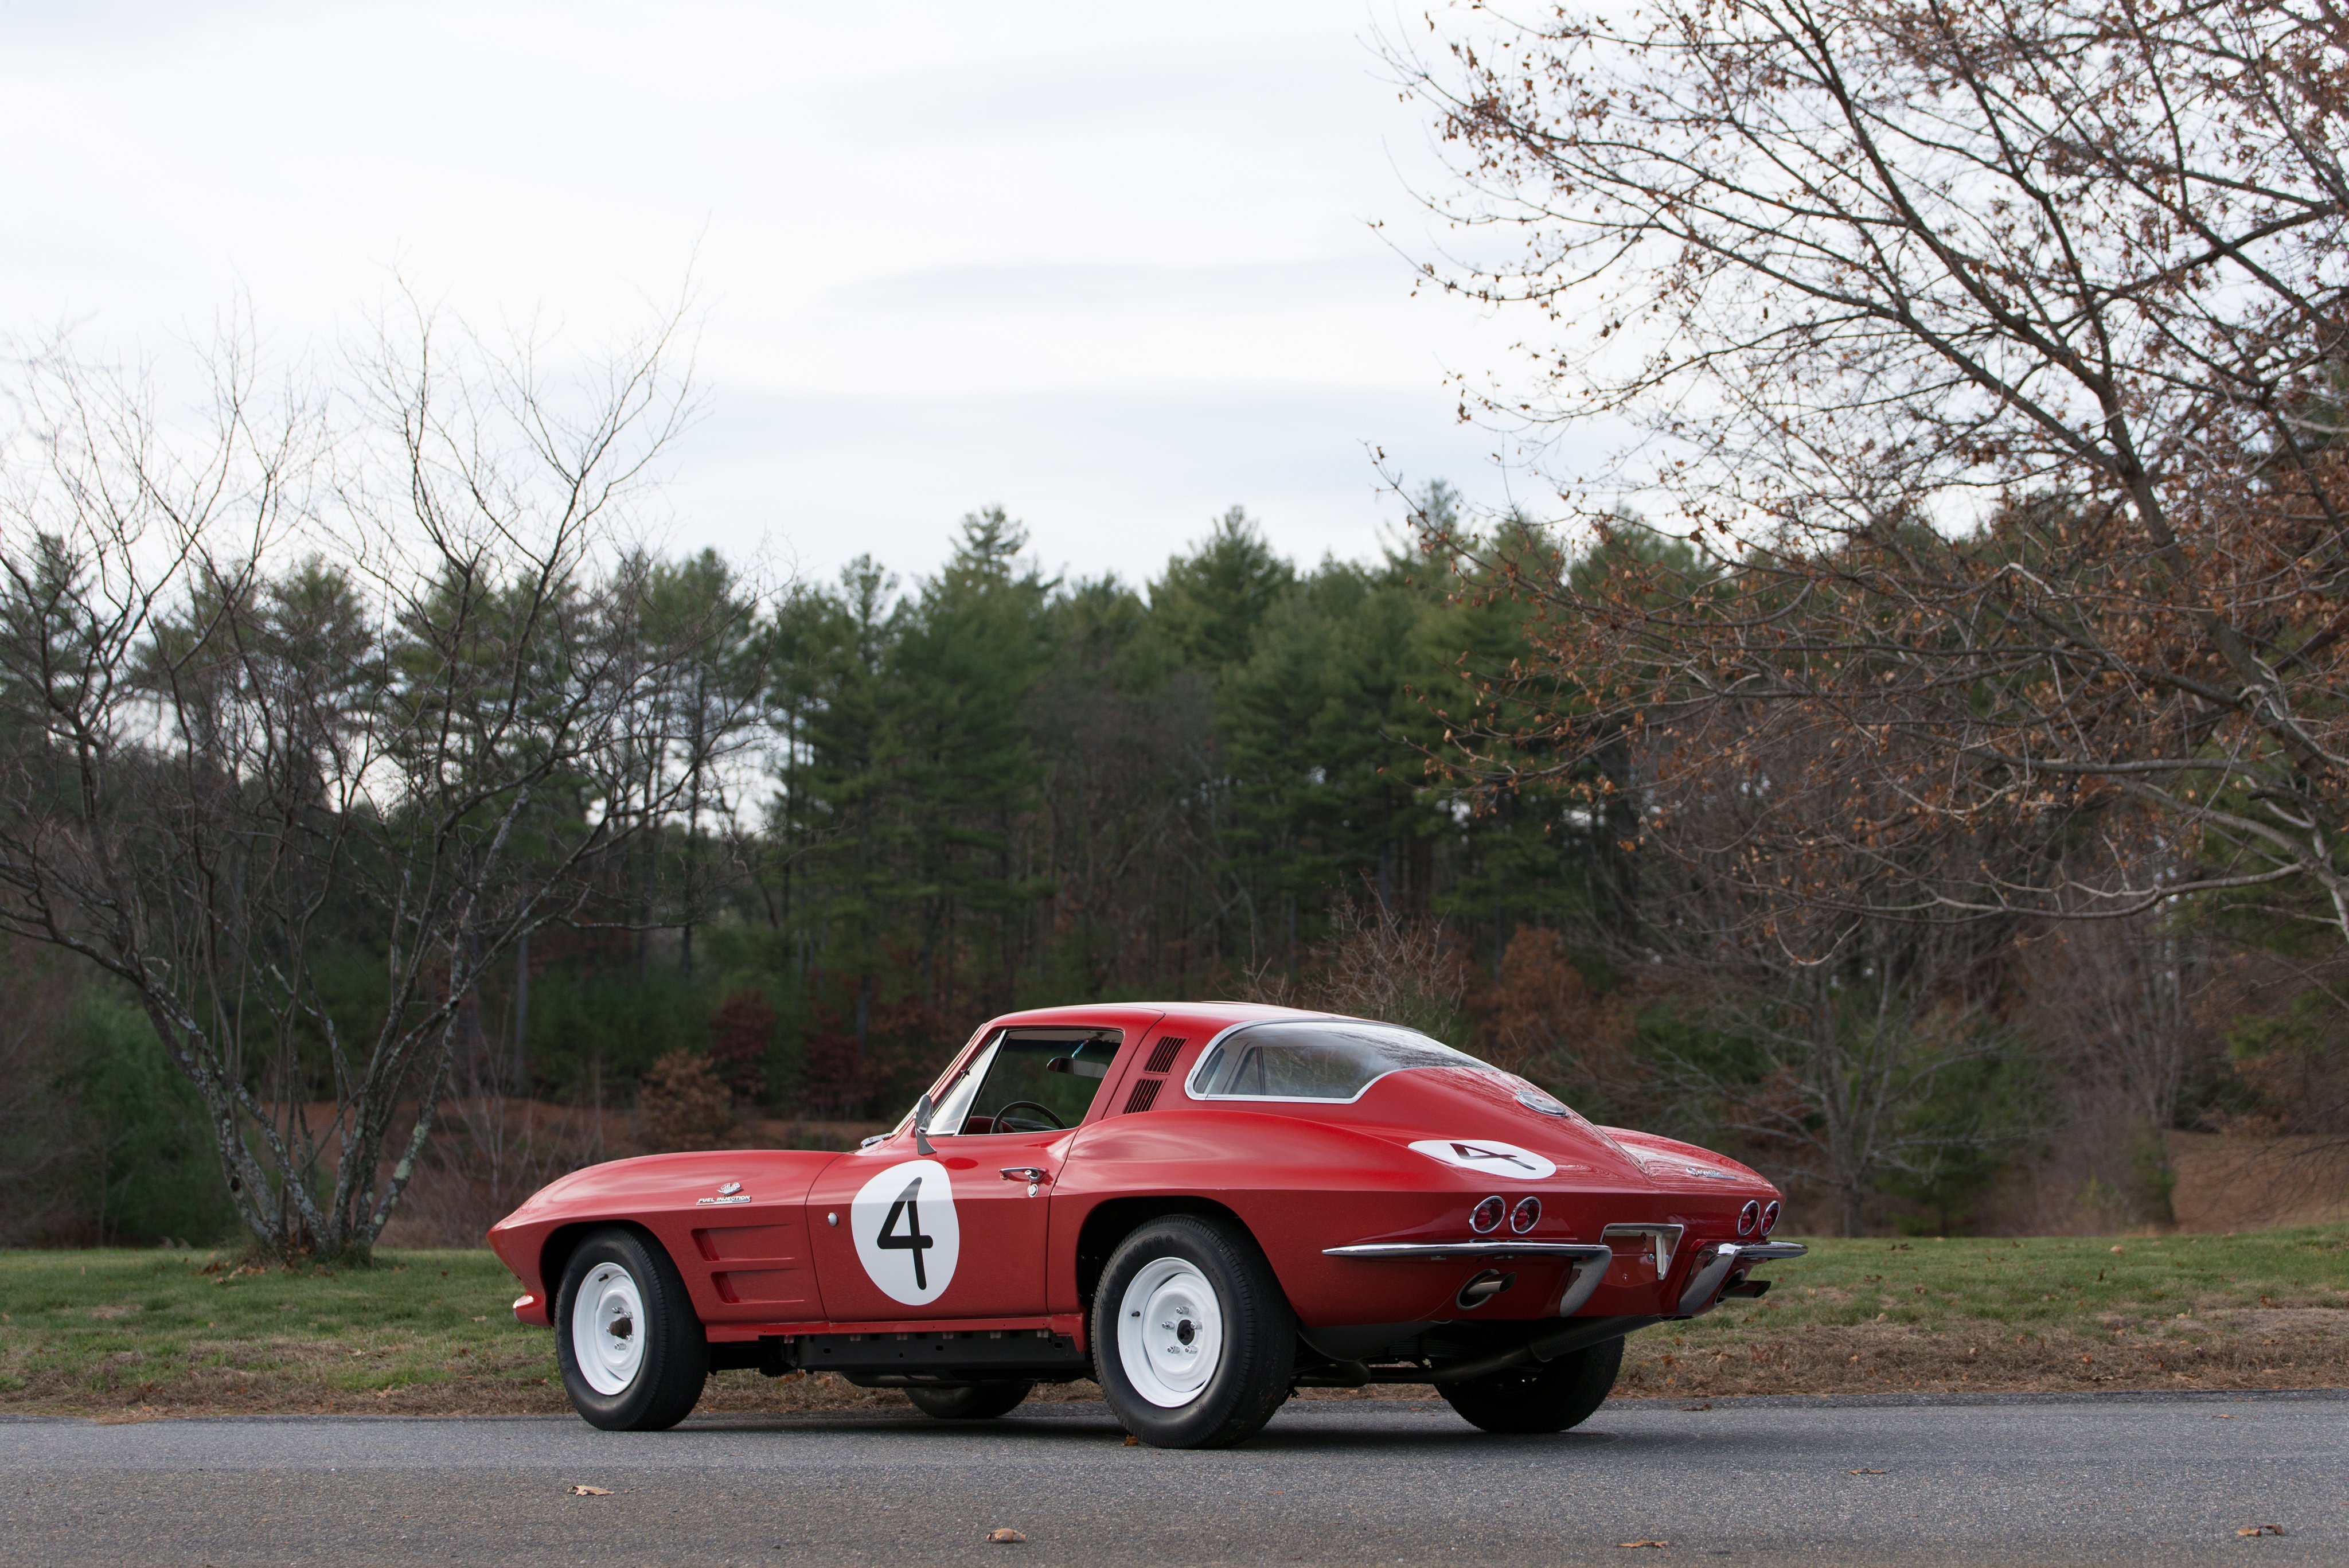 1964, Chevrolet, Corvette, Sting, Ray, L84, Scca, Race, Racing, Rally, Stingray, Muscle, Hot, Rod, Rods, Supercar, Classic Wallpaper